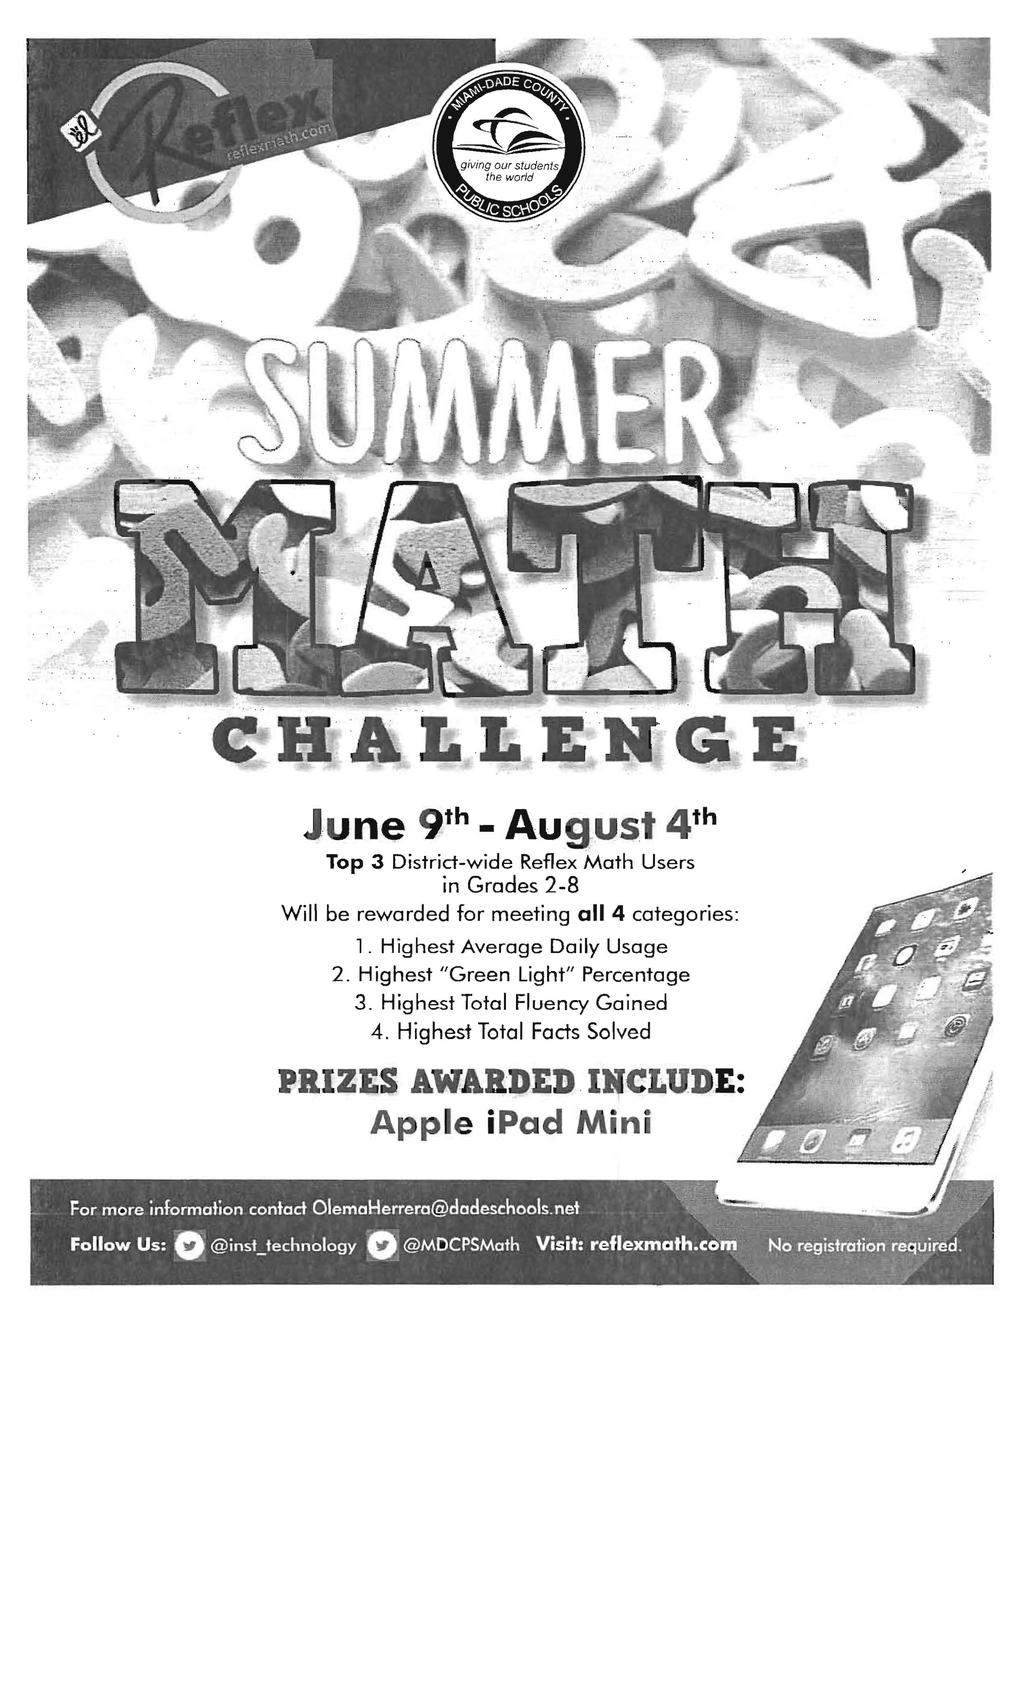 June 9 th - AU9:USt 4 th Top 3 District-wide Reflex Math Users in Grades 2- Will be rewarded for meeting all 4 categories: 1.